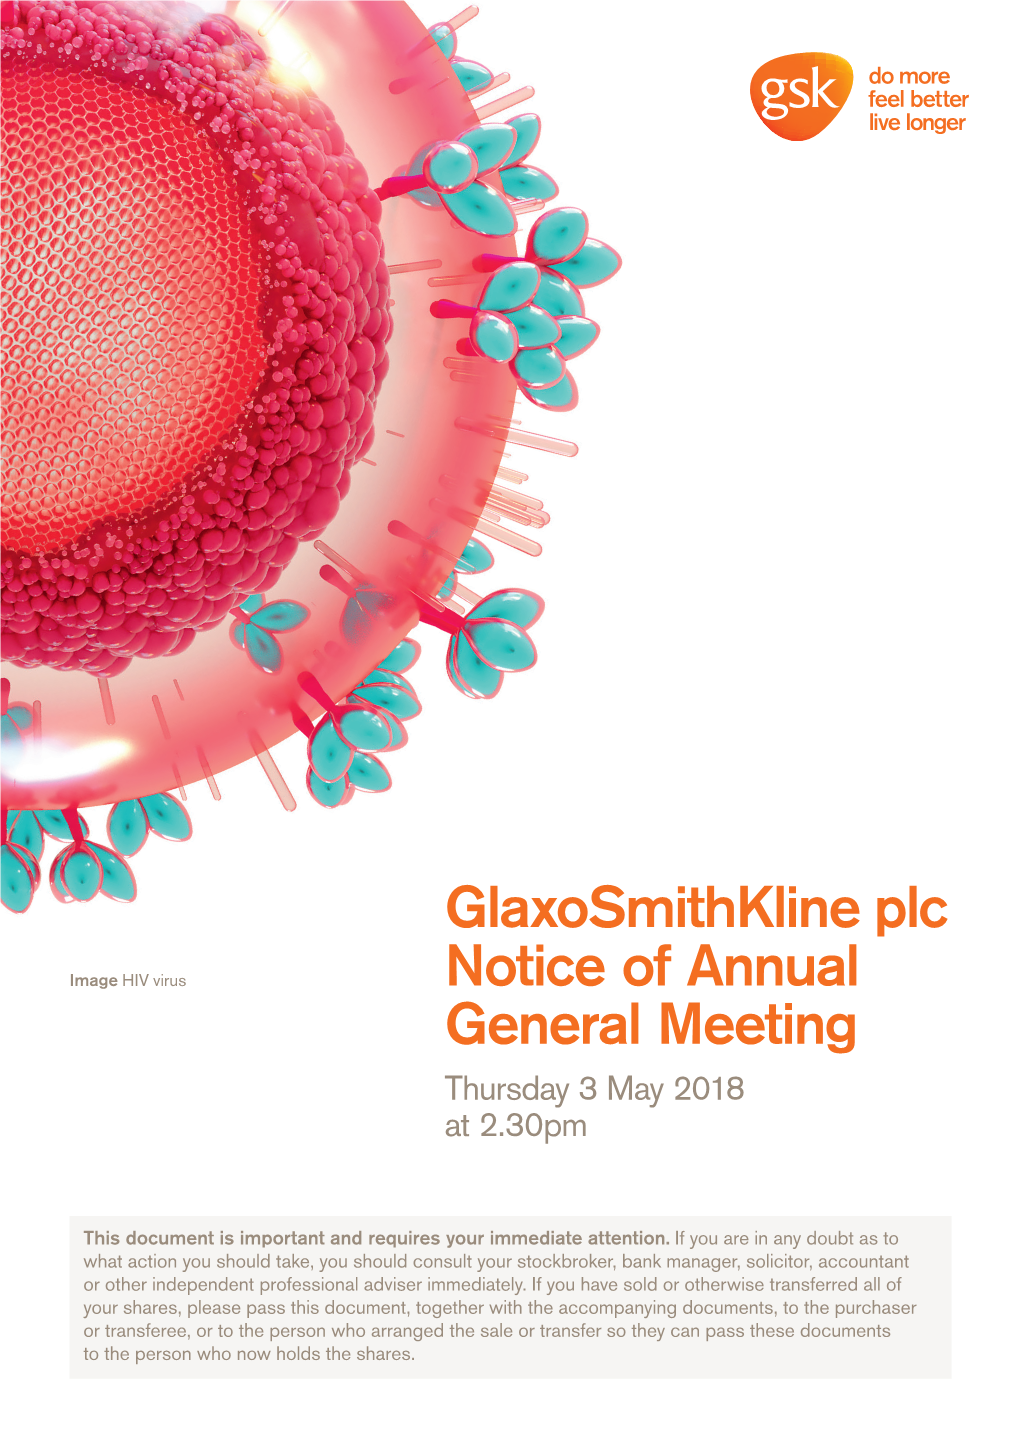 Notice of Meeting for the Eighteenth Annual General Meeting (AGM) of Glaxosmithkline Plc